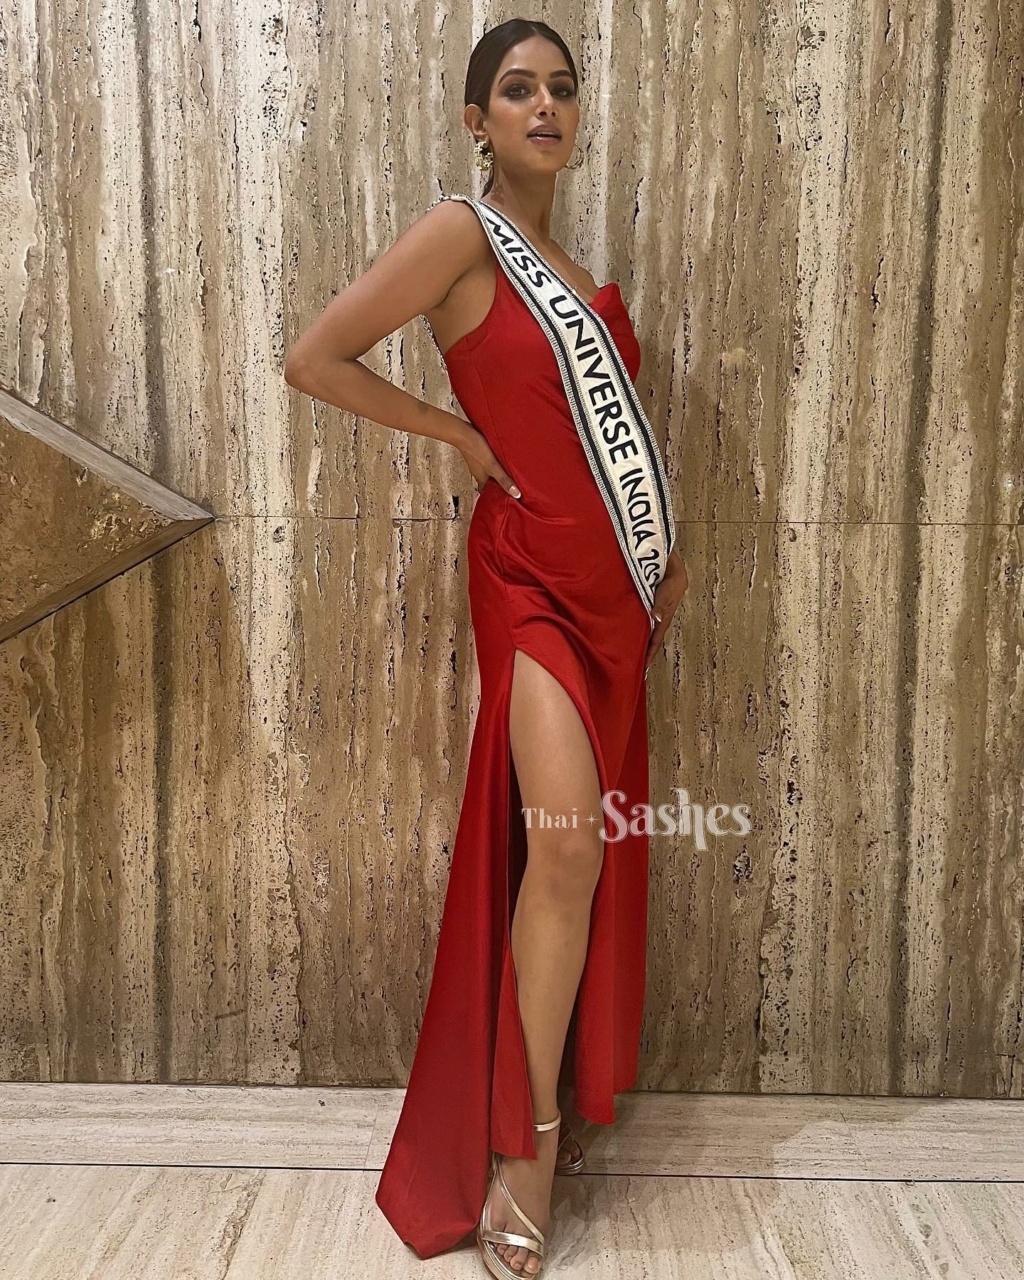 *****OFFICIAL COVERAGE OF MISS UNIVERSE 2021***** Final Strectch! - Page 7 26184111